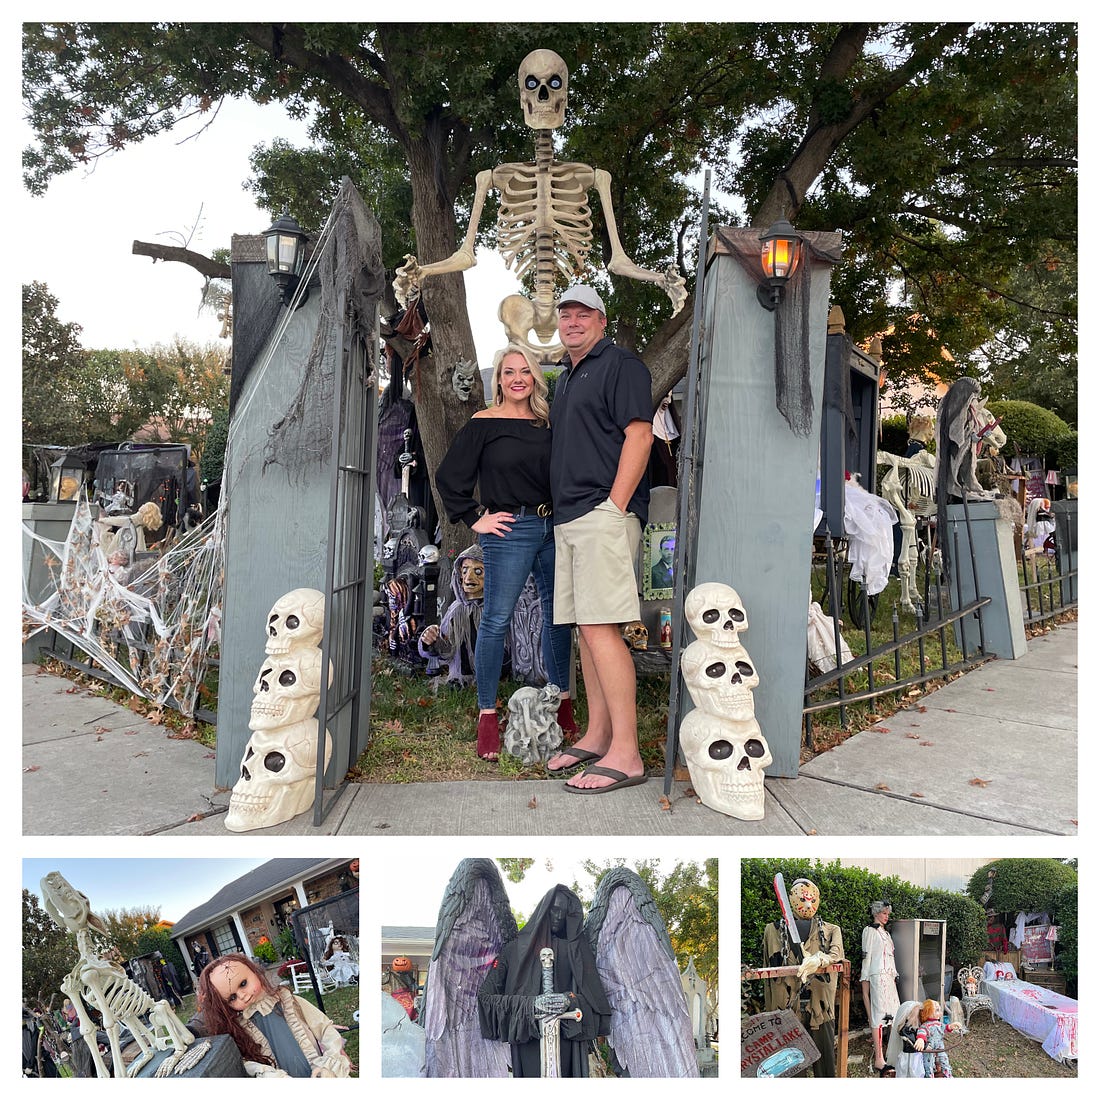 Christa and Terry Ward with their yards full of elaborate Halloween decorations